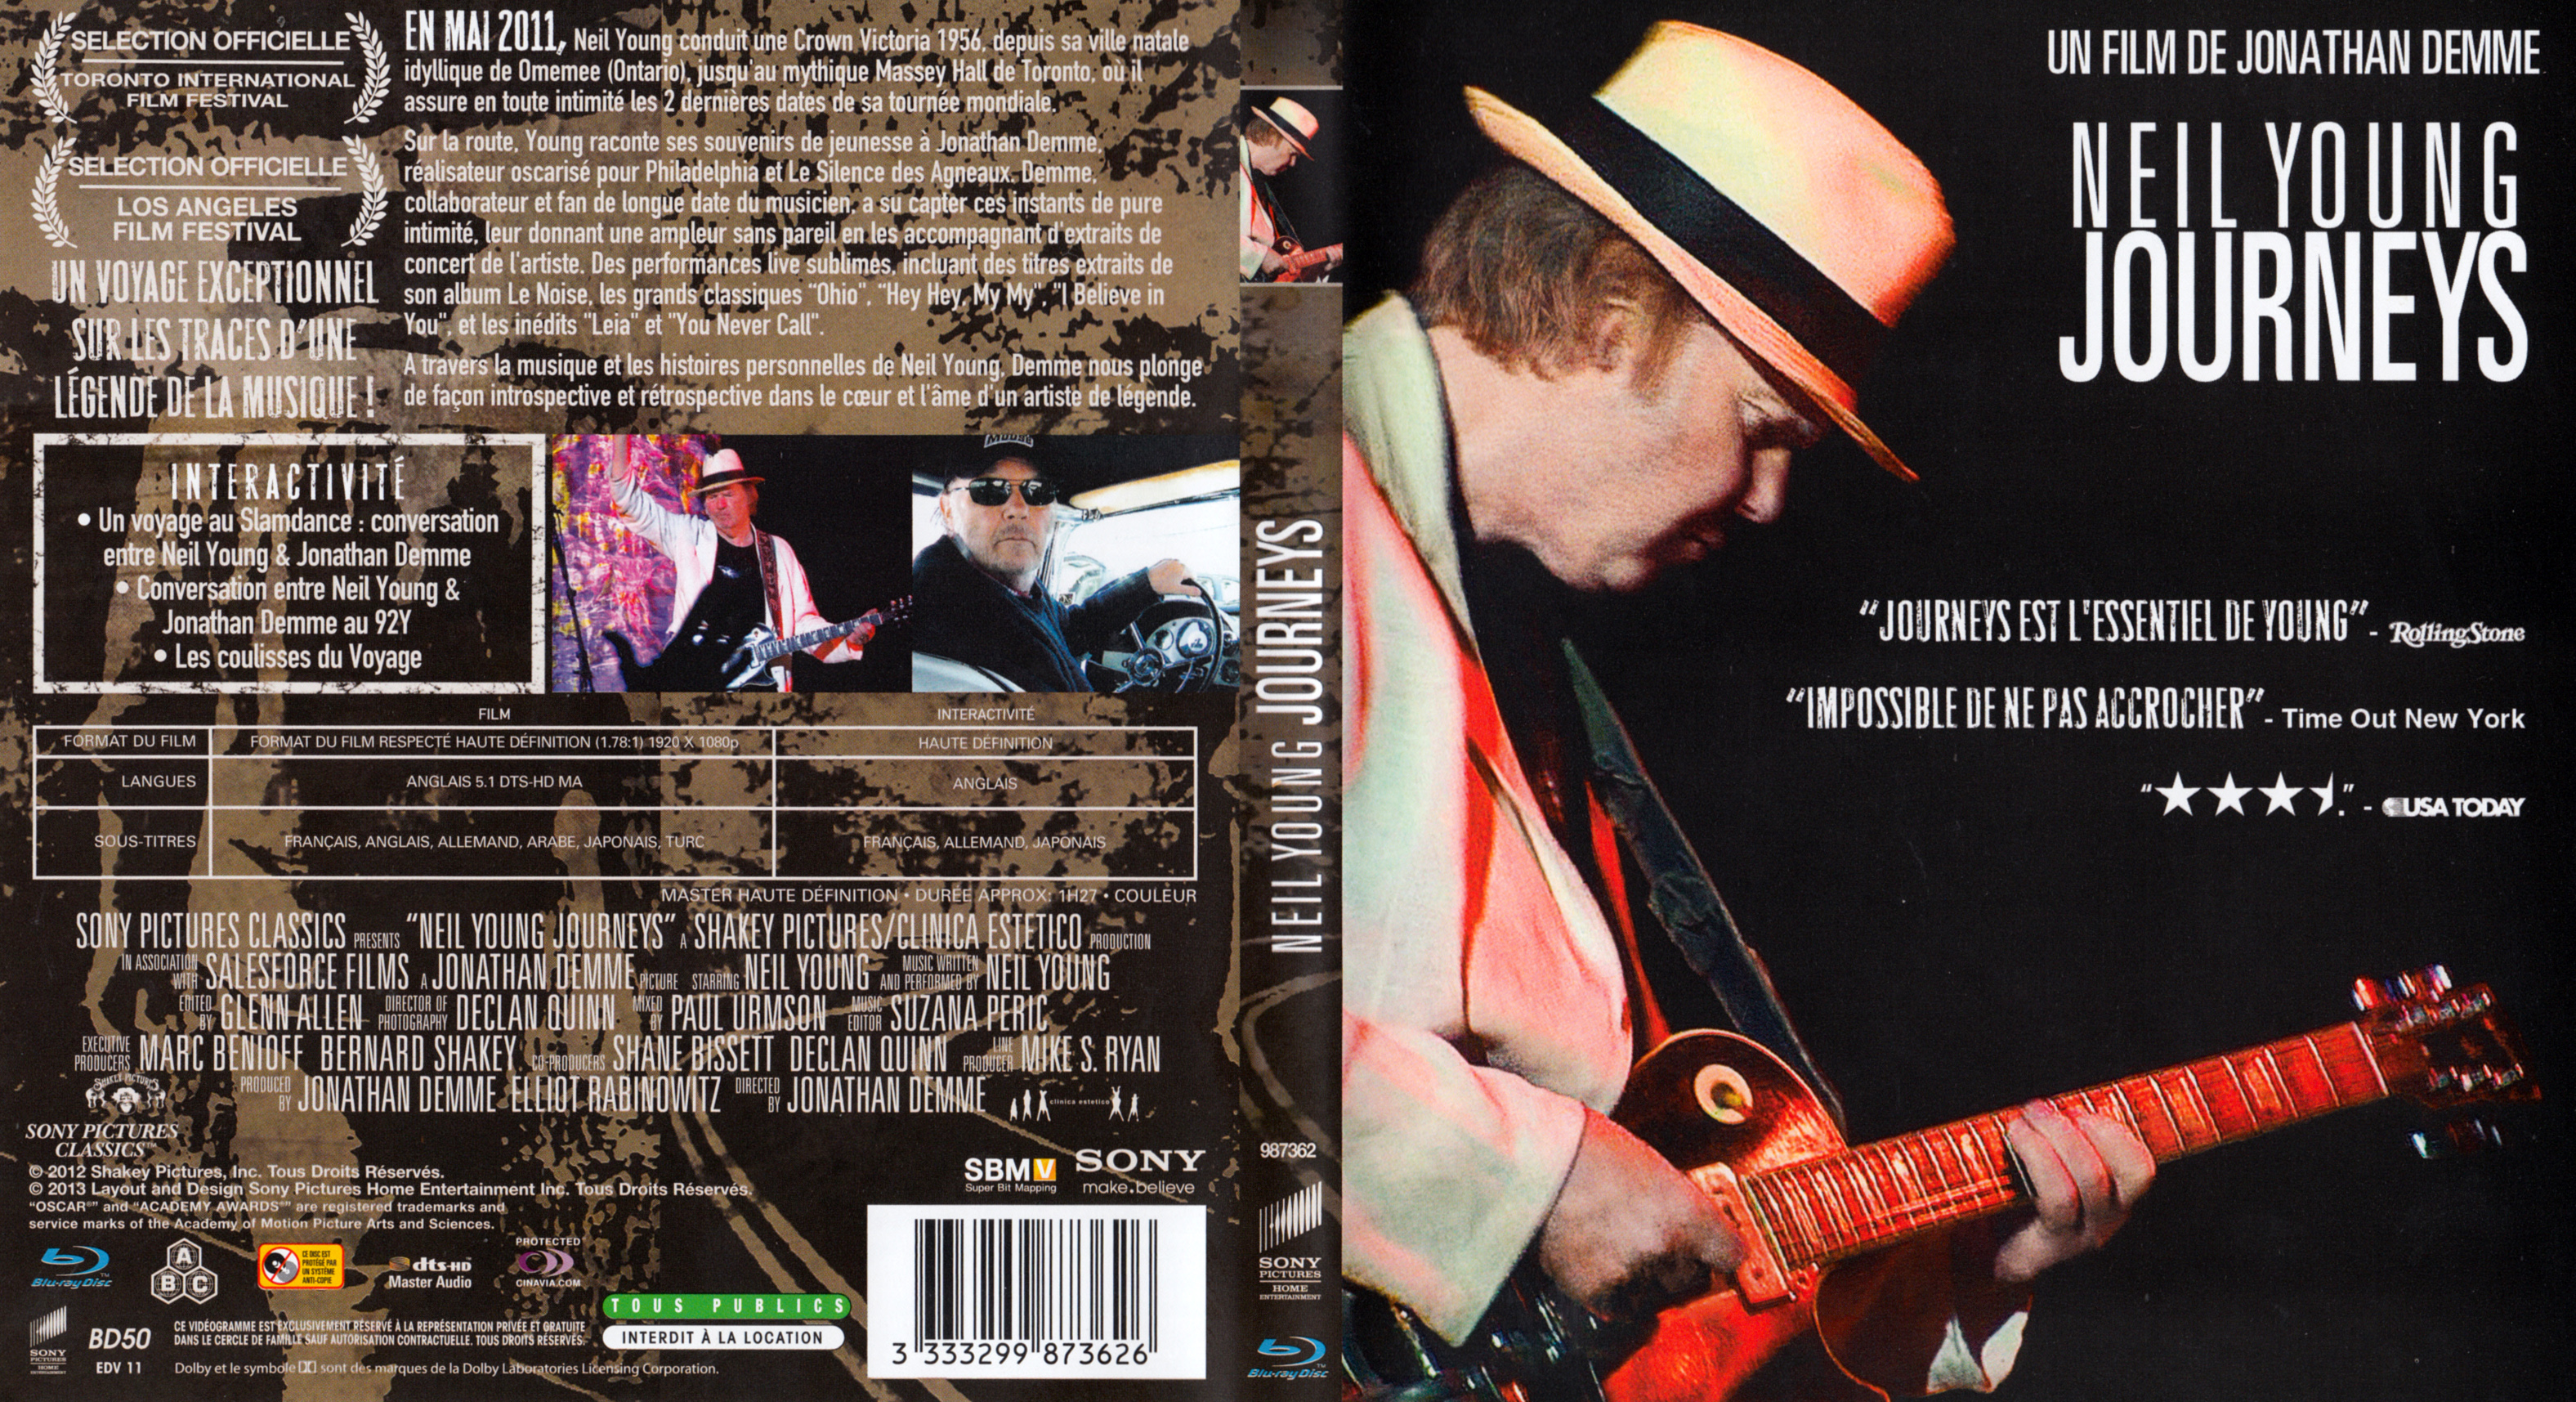 Jaquette DVD Neil Young - Journeys (BLU-RAY) v2